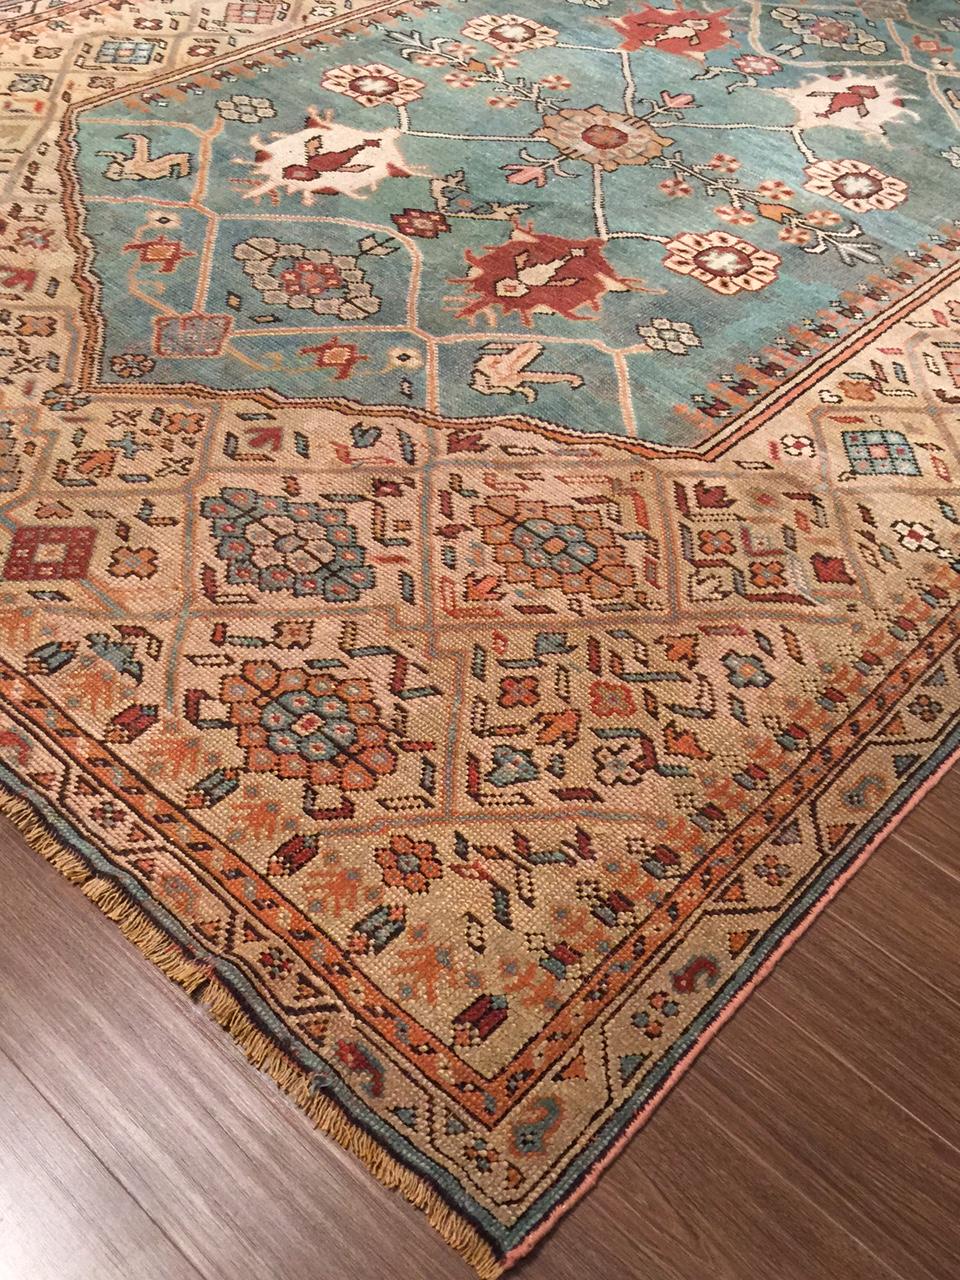 19th Century Antique Turquoise Oushak Rug  8'6 x 12'5 For Sale